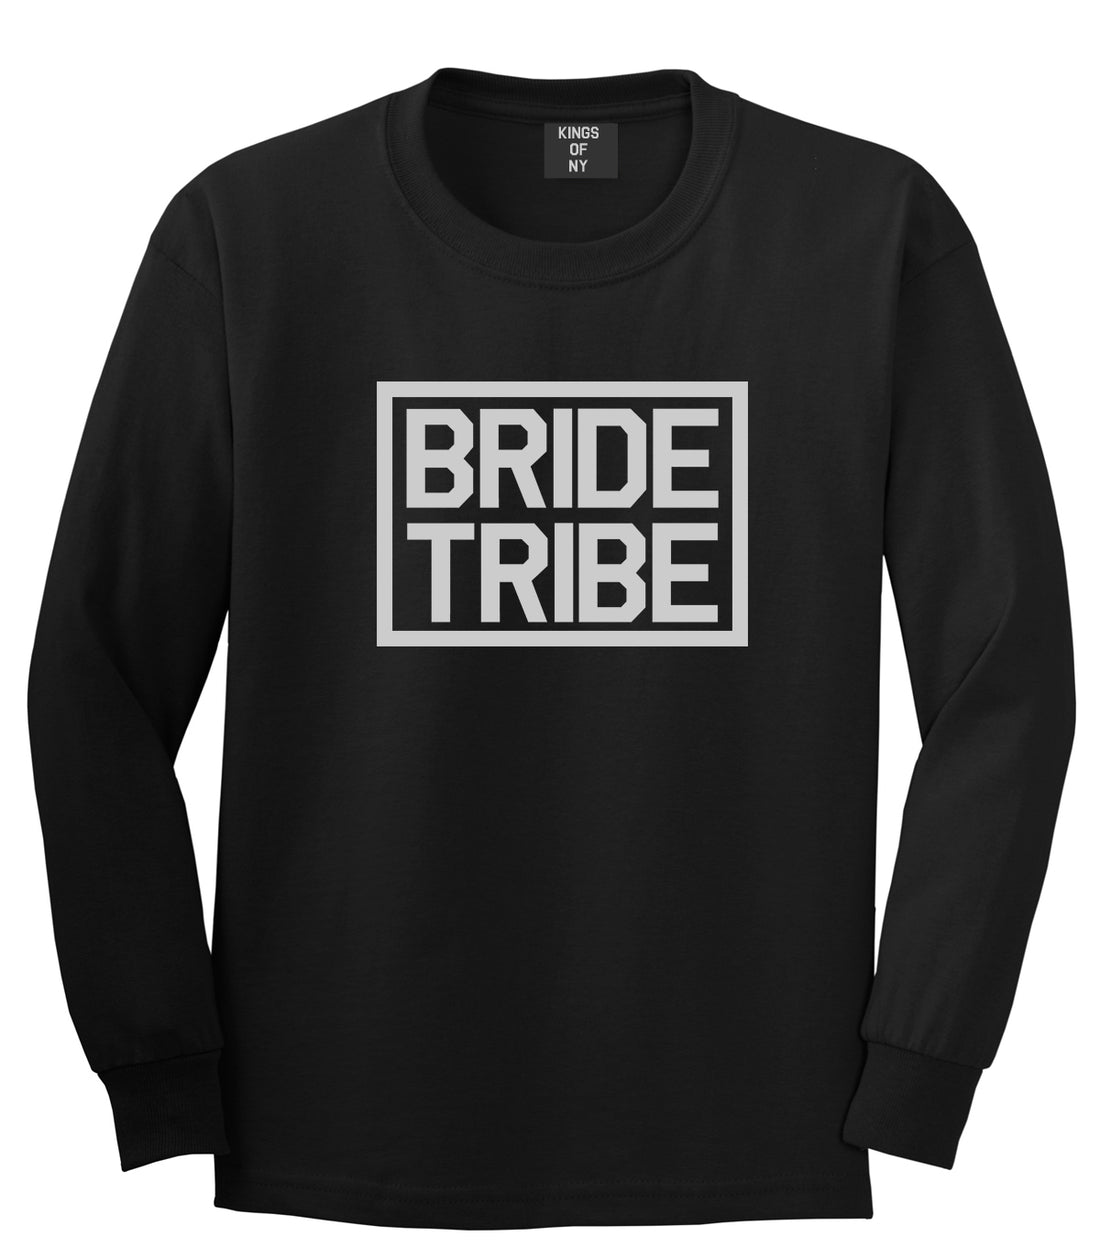 Bride Tribe Bachlorette Party Black Long Sleeve T-Shirt by Kings Of NY